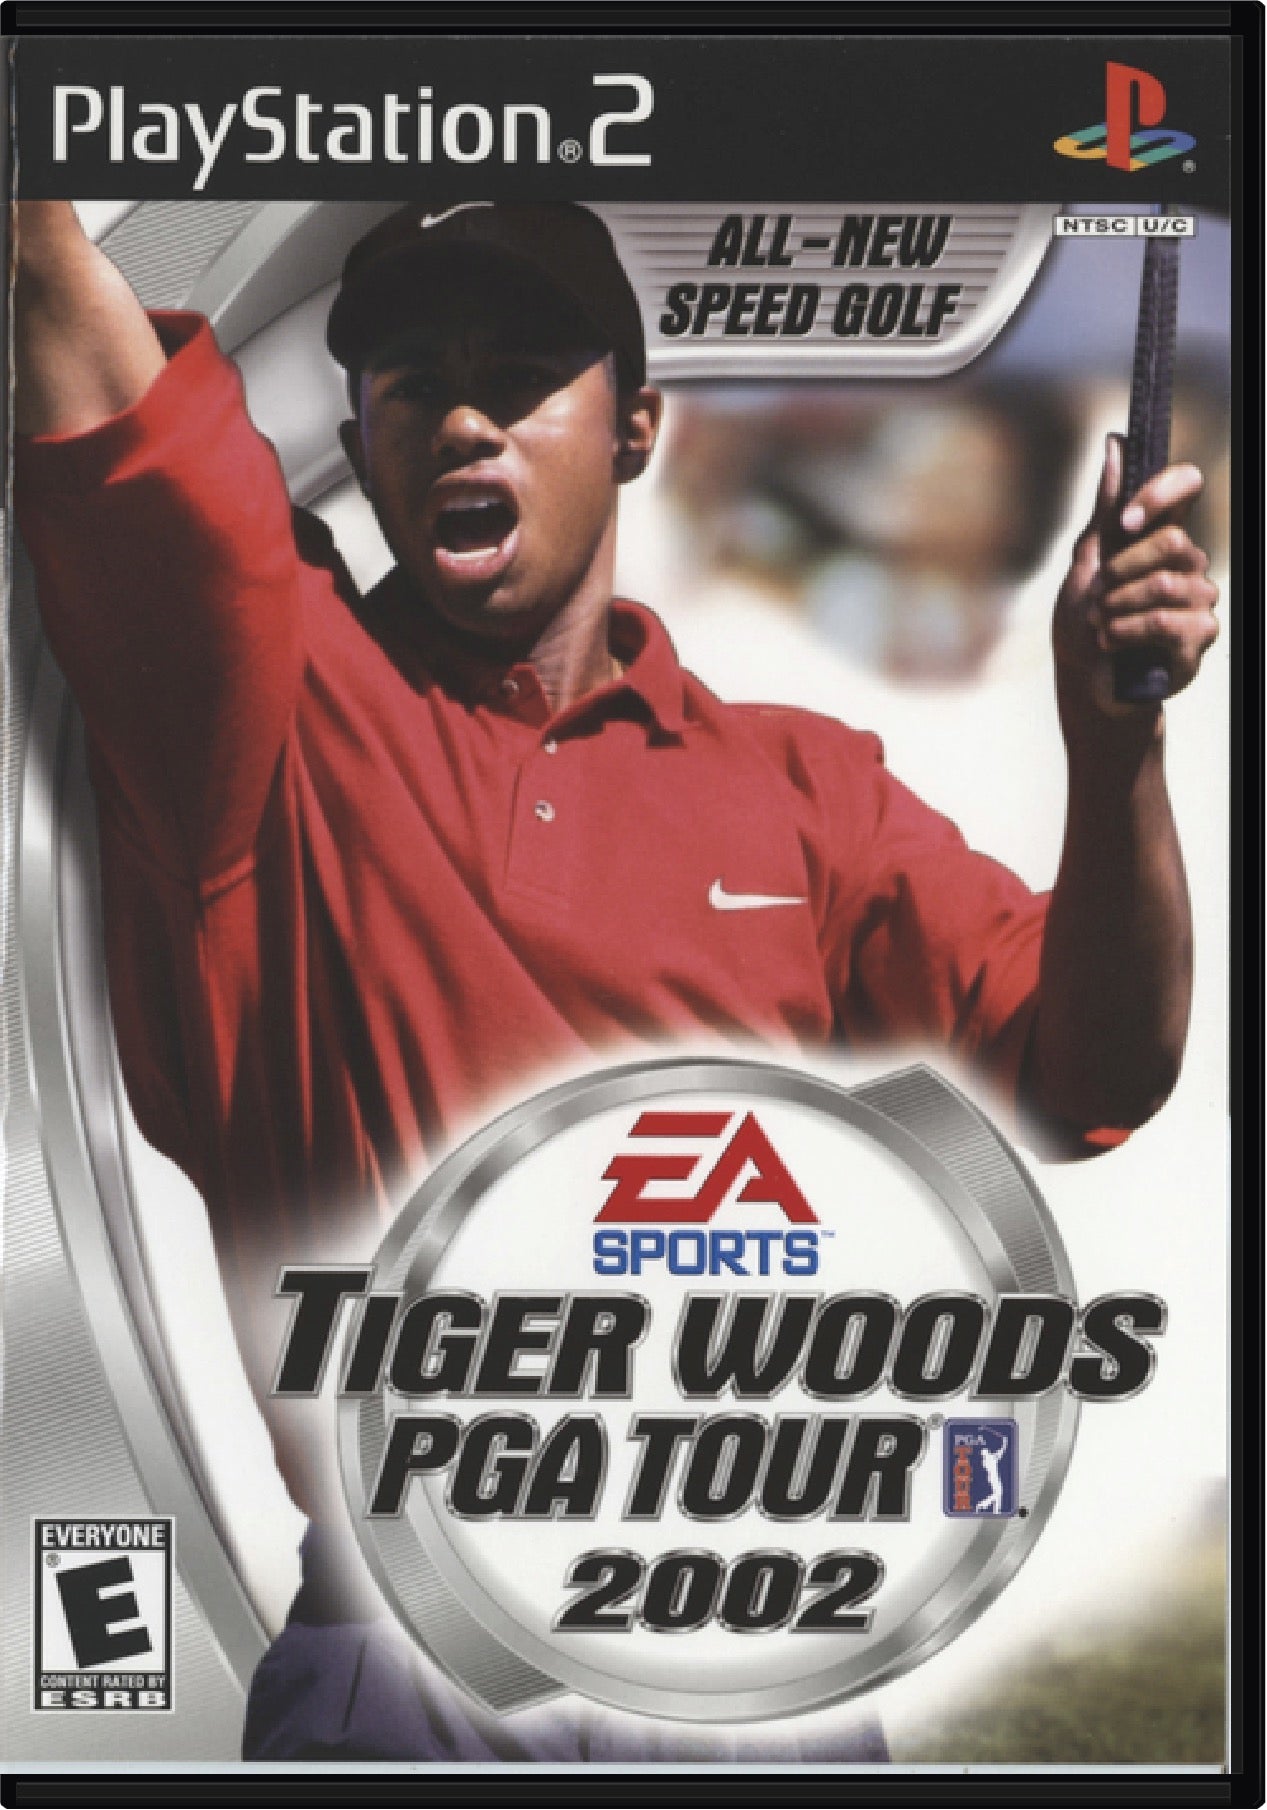 Tiger Woods PGA Tour 2002 Cover Art and Product Photo